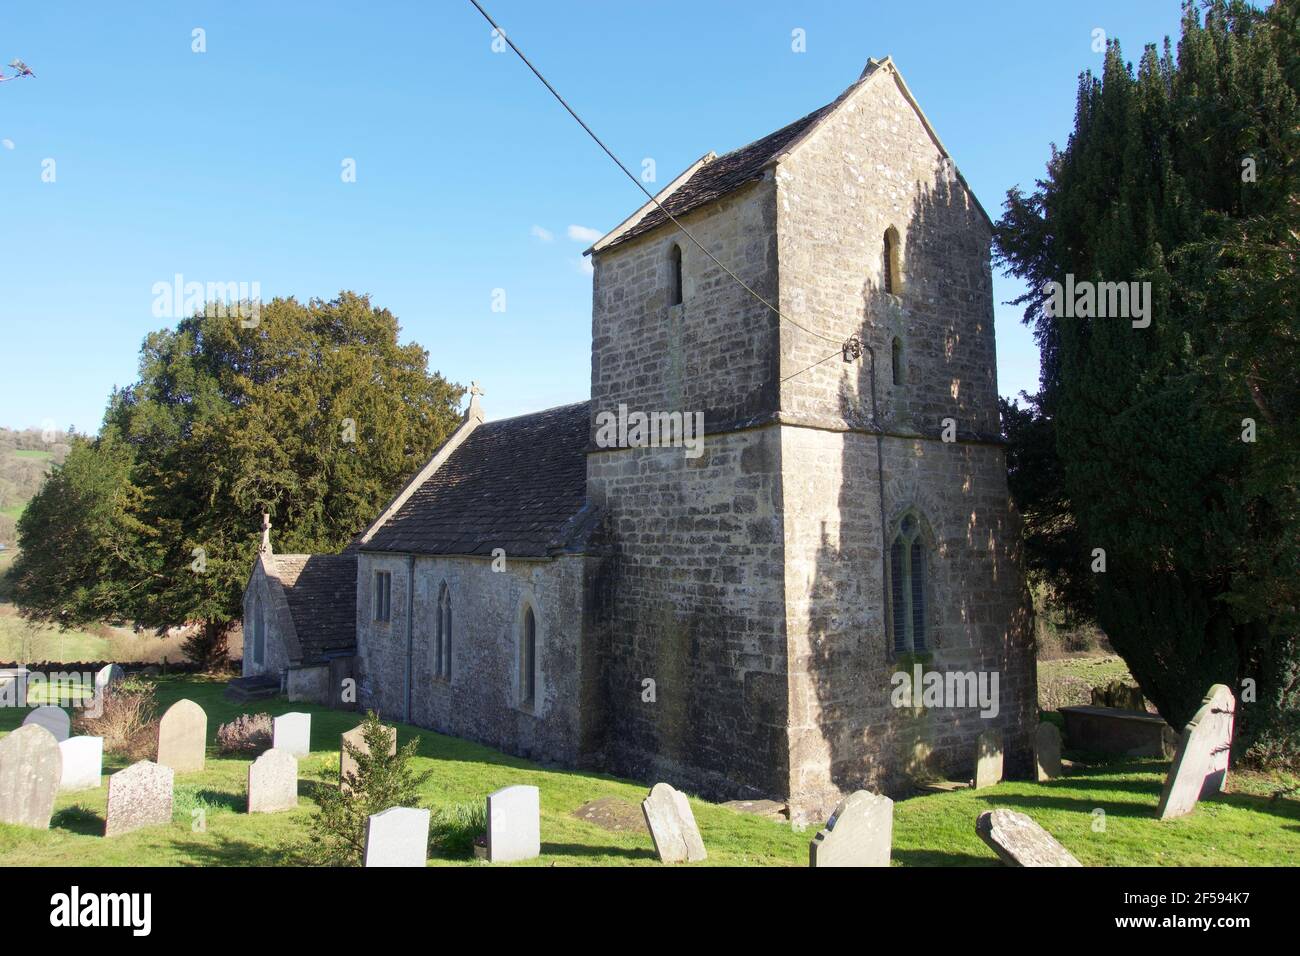 An old English church in the English Countryside on a sunny Springtime day Stock Photo